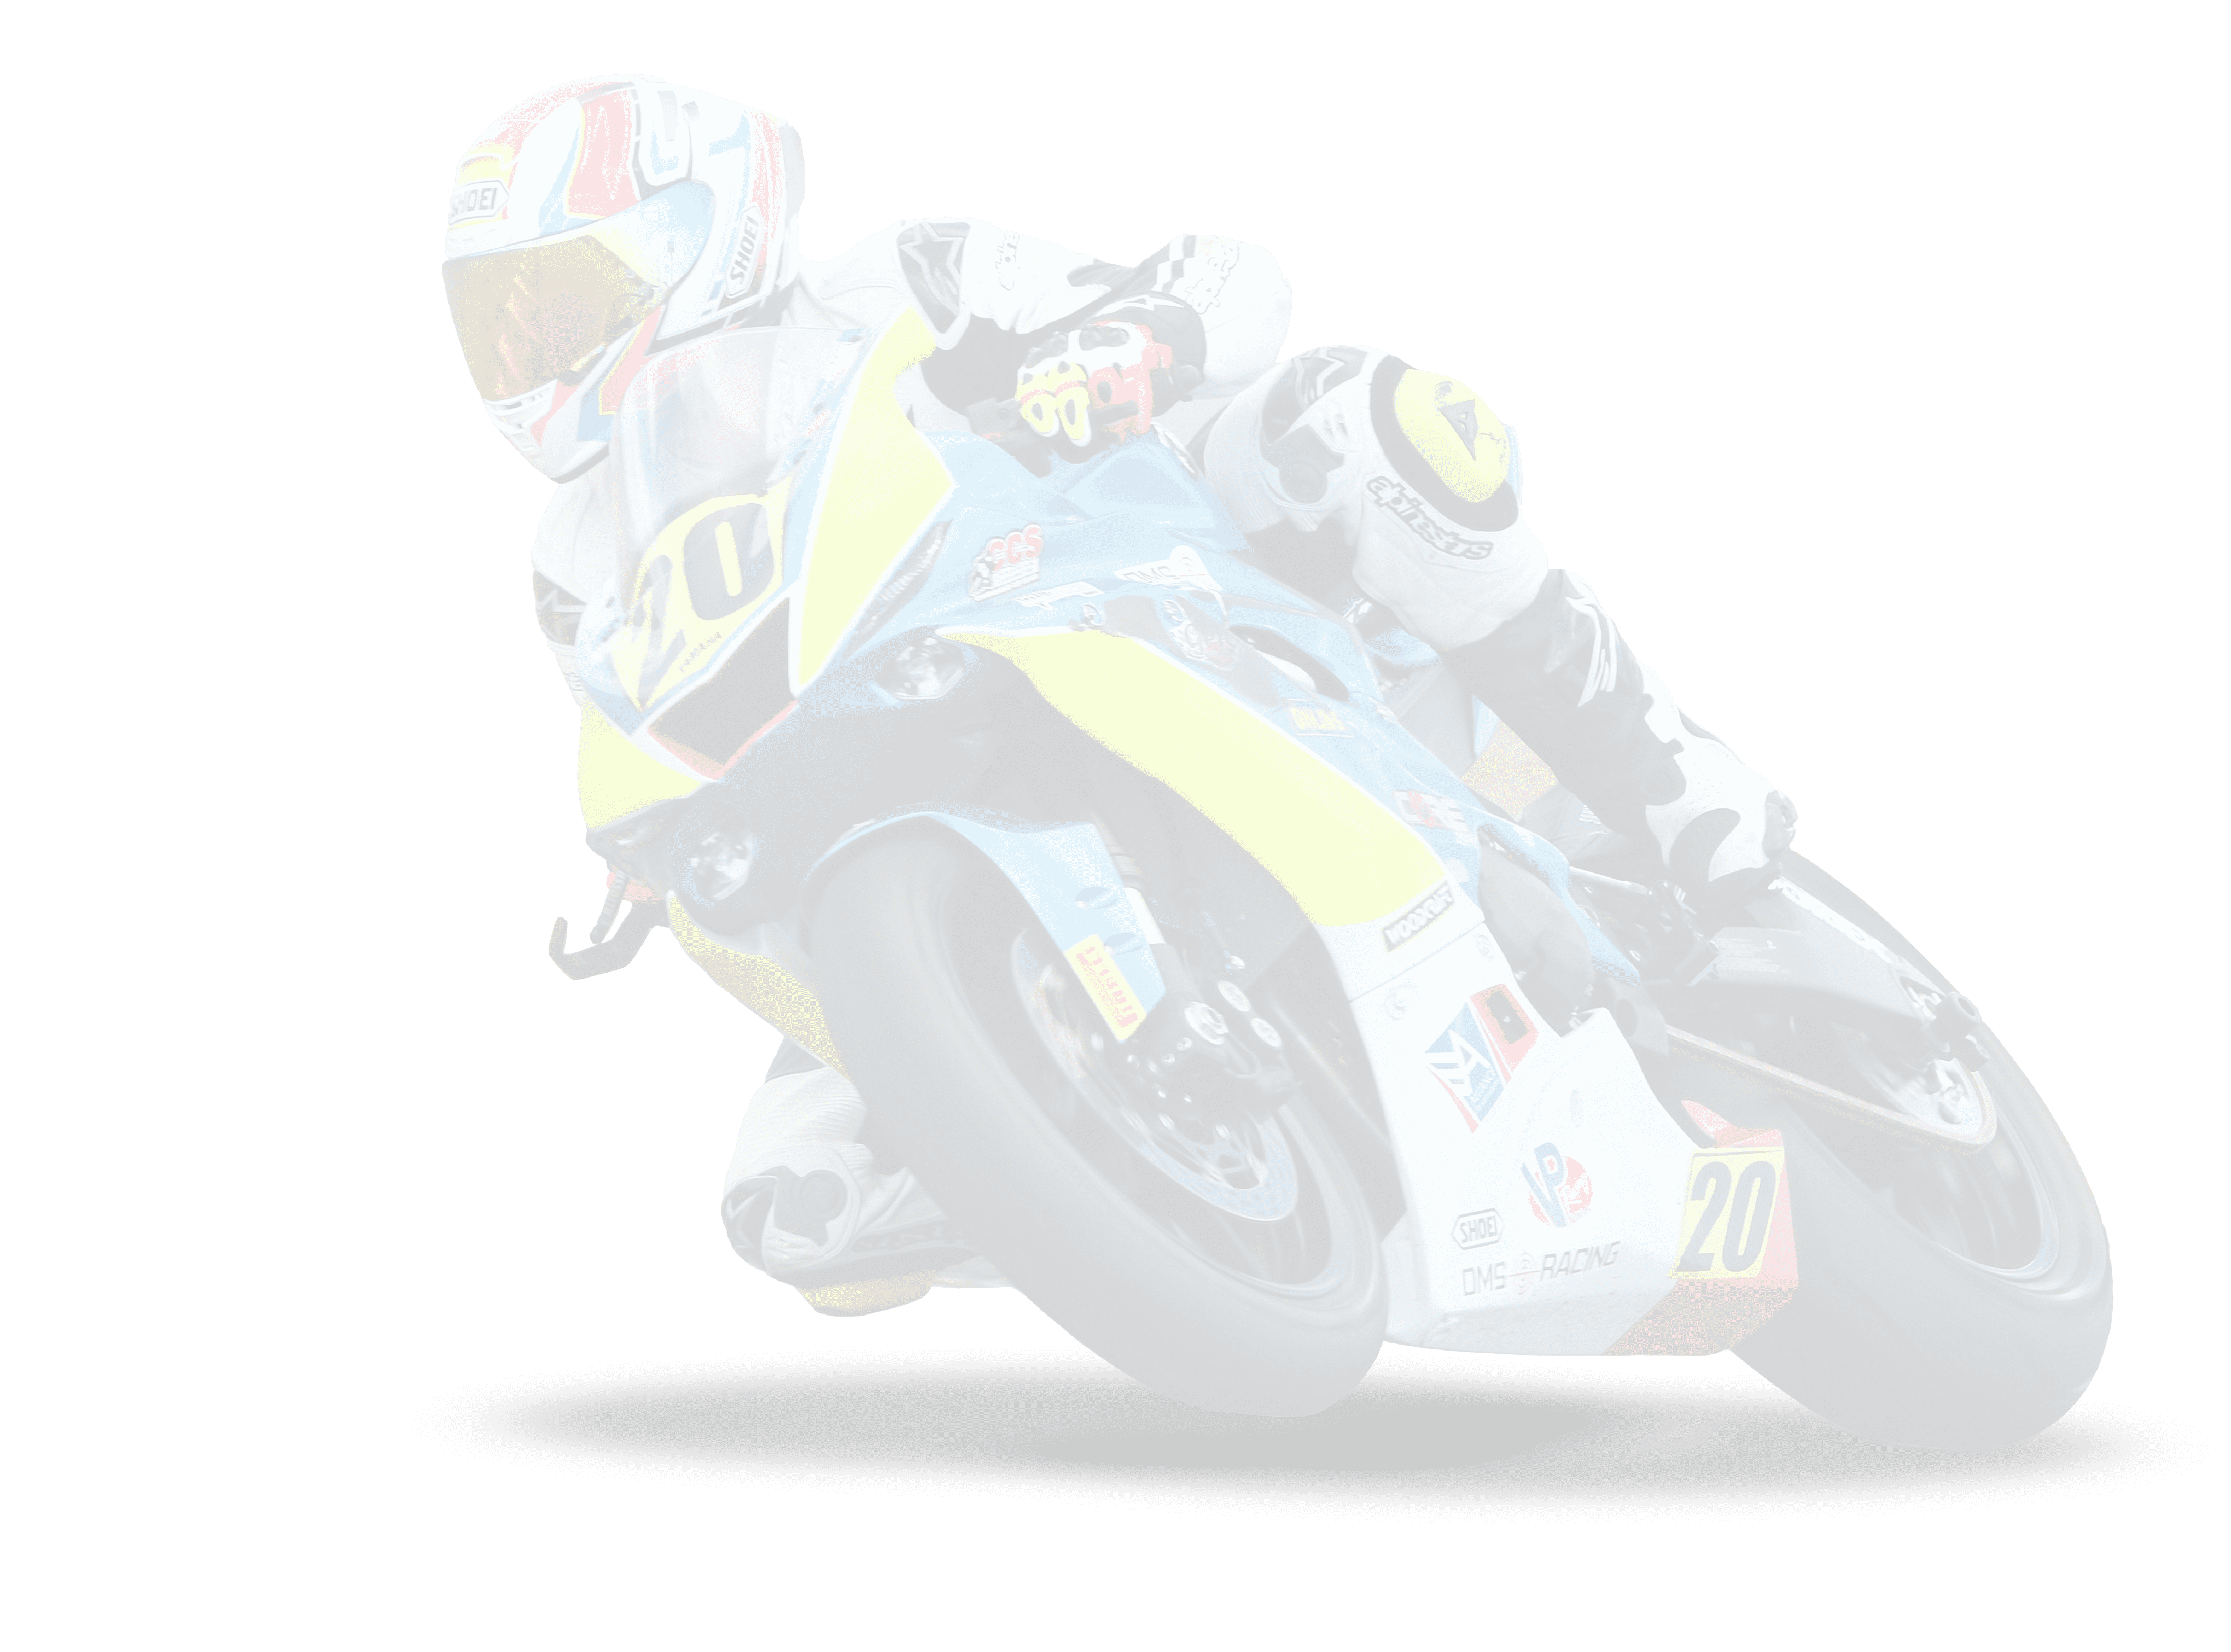 Peter strack racing on a motorcycle